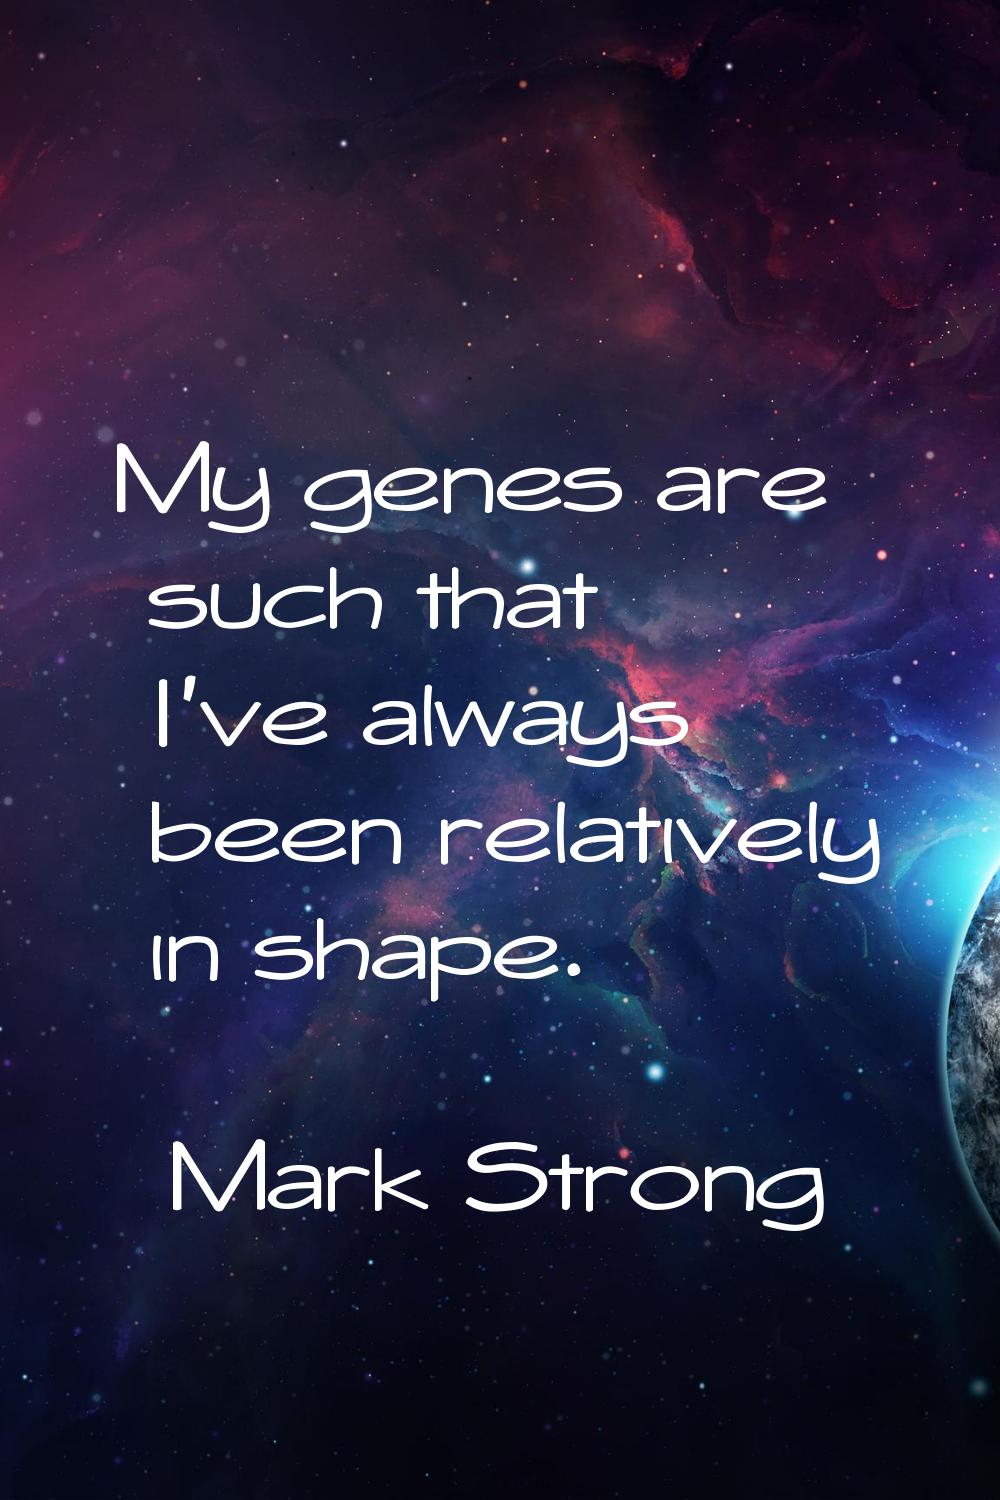 My genes are such that I've always been relatively in shape.